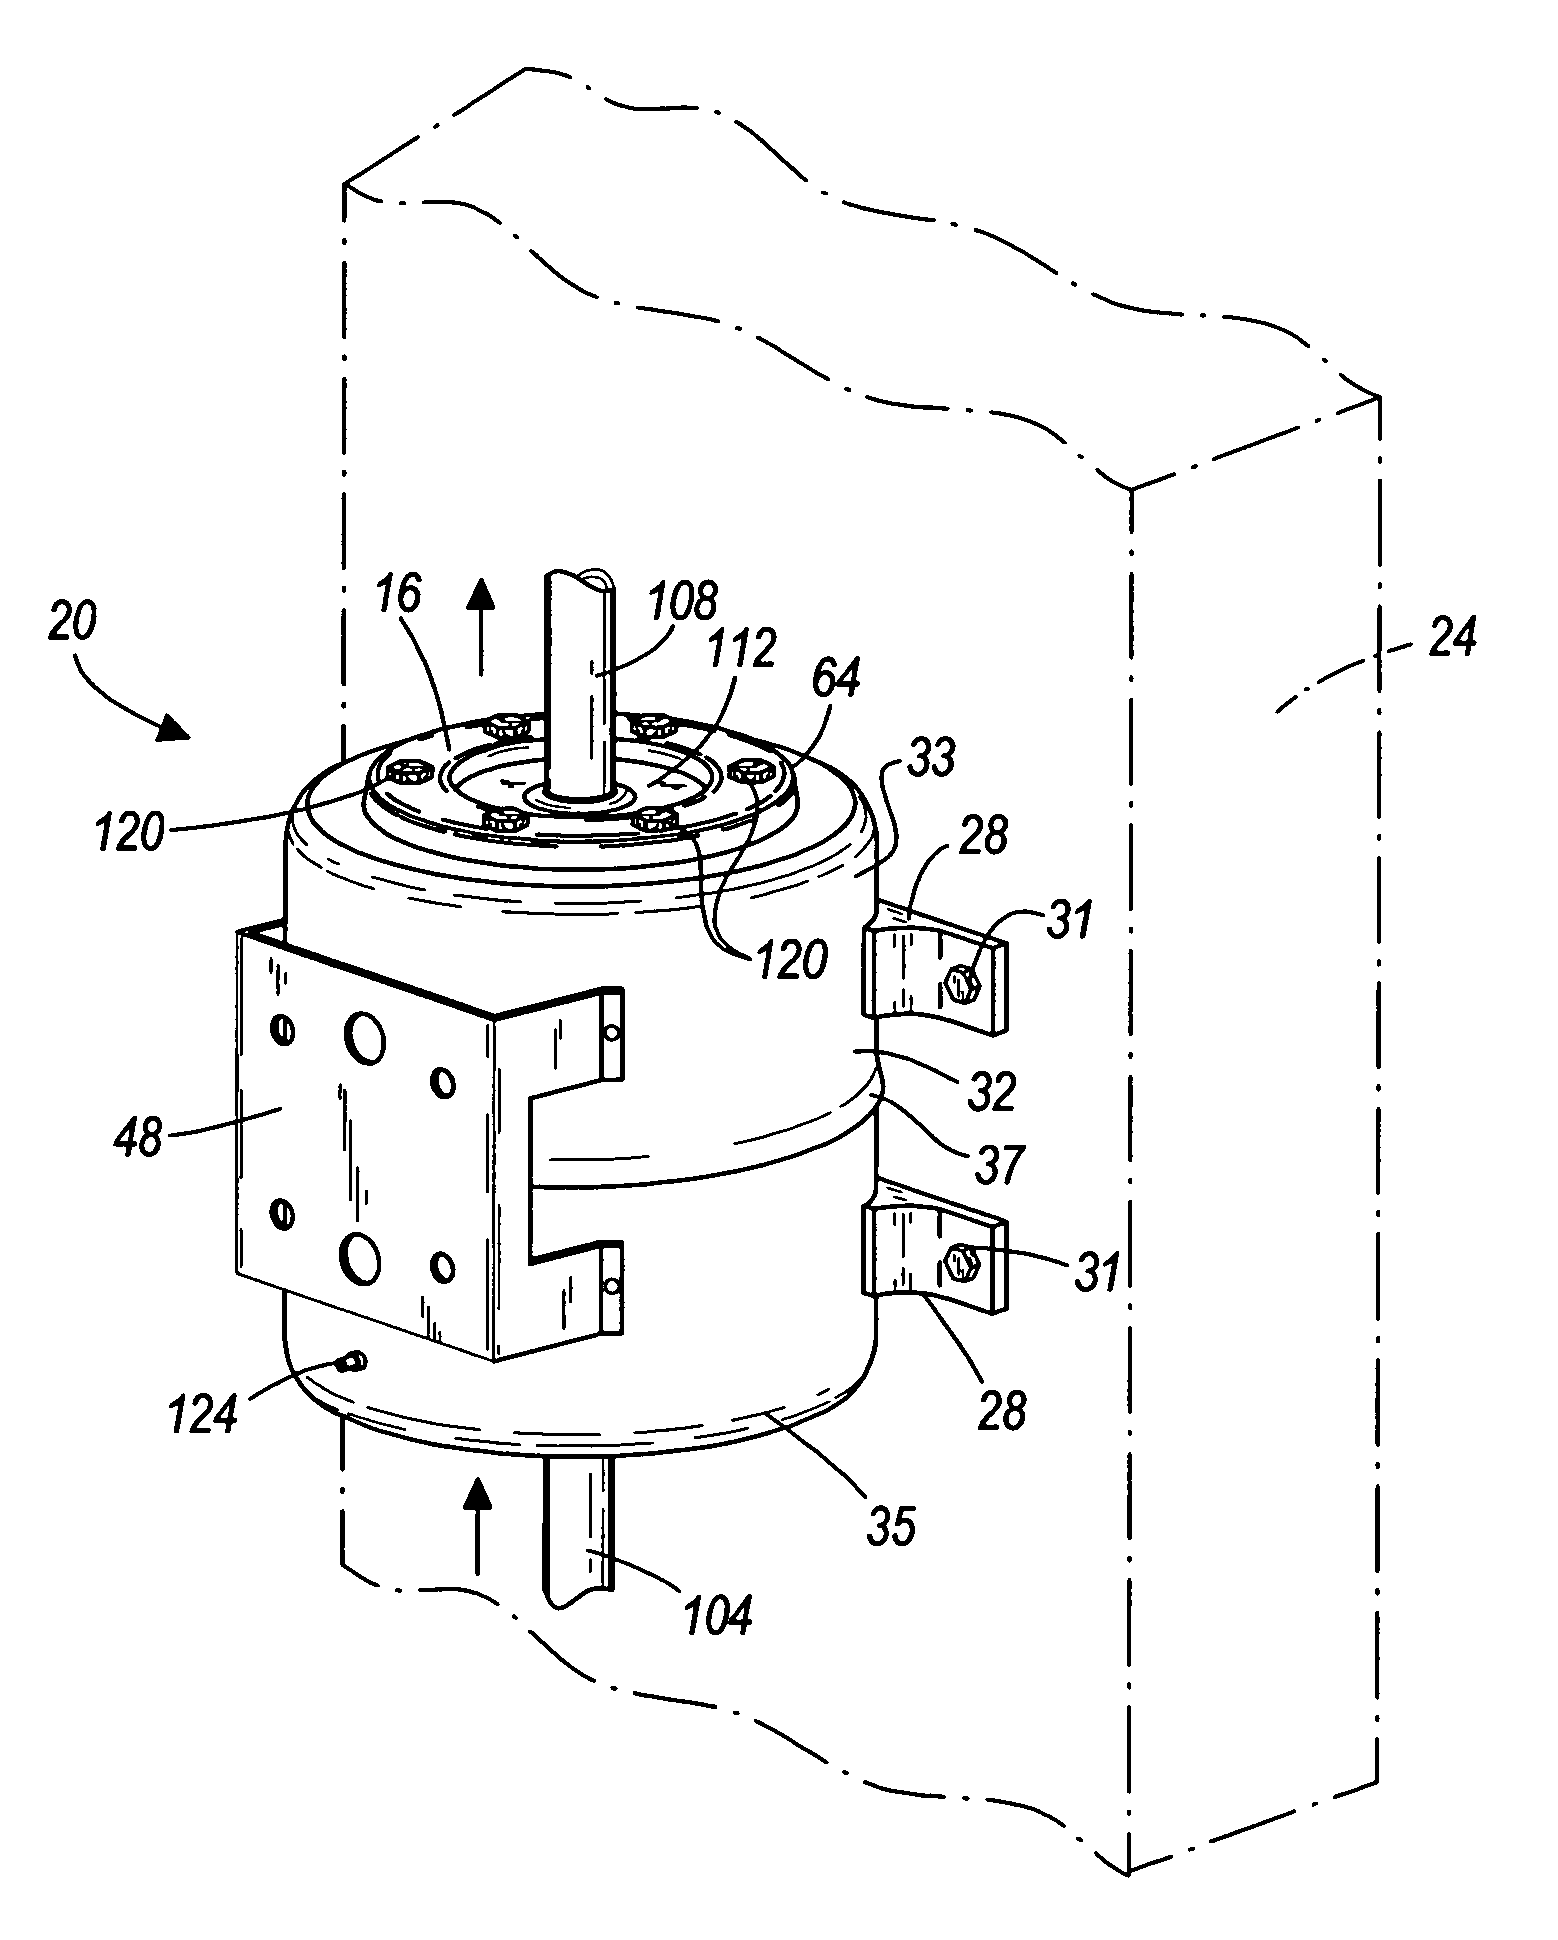 Accumulator tank assembly and method